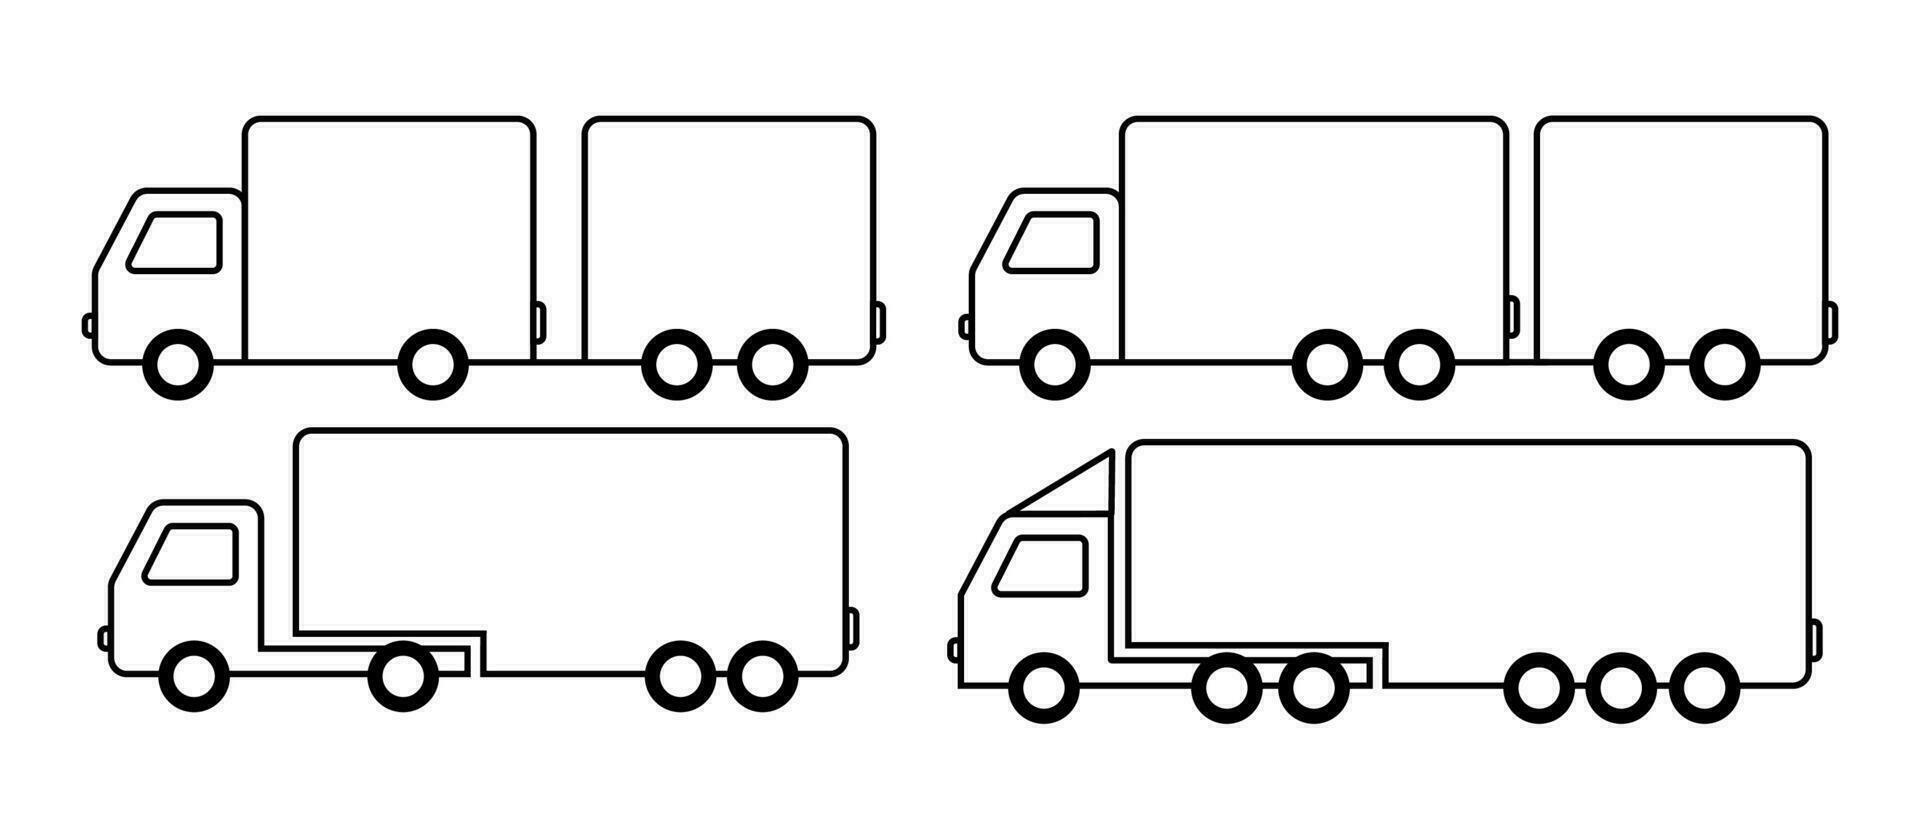 Set of simple truck images. Images for delivery and transportation of various products vector